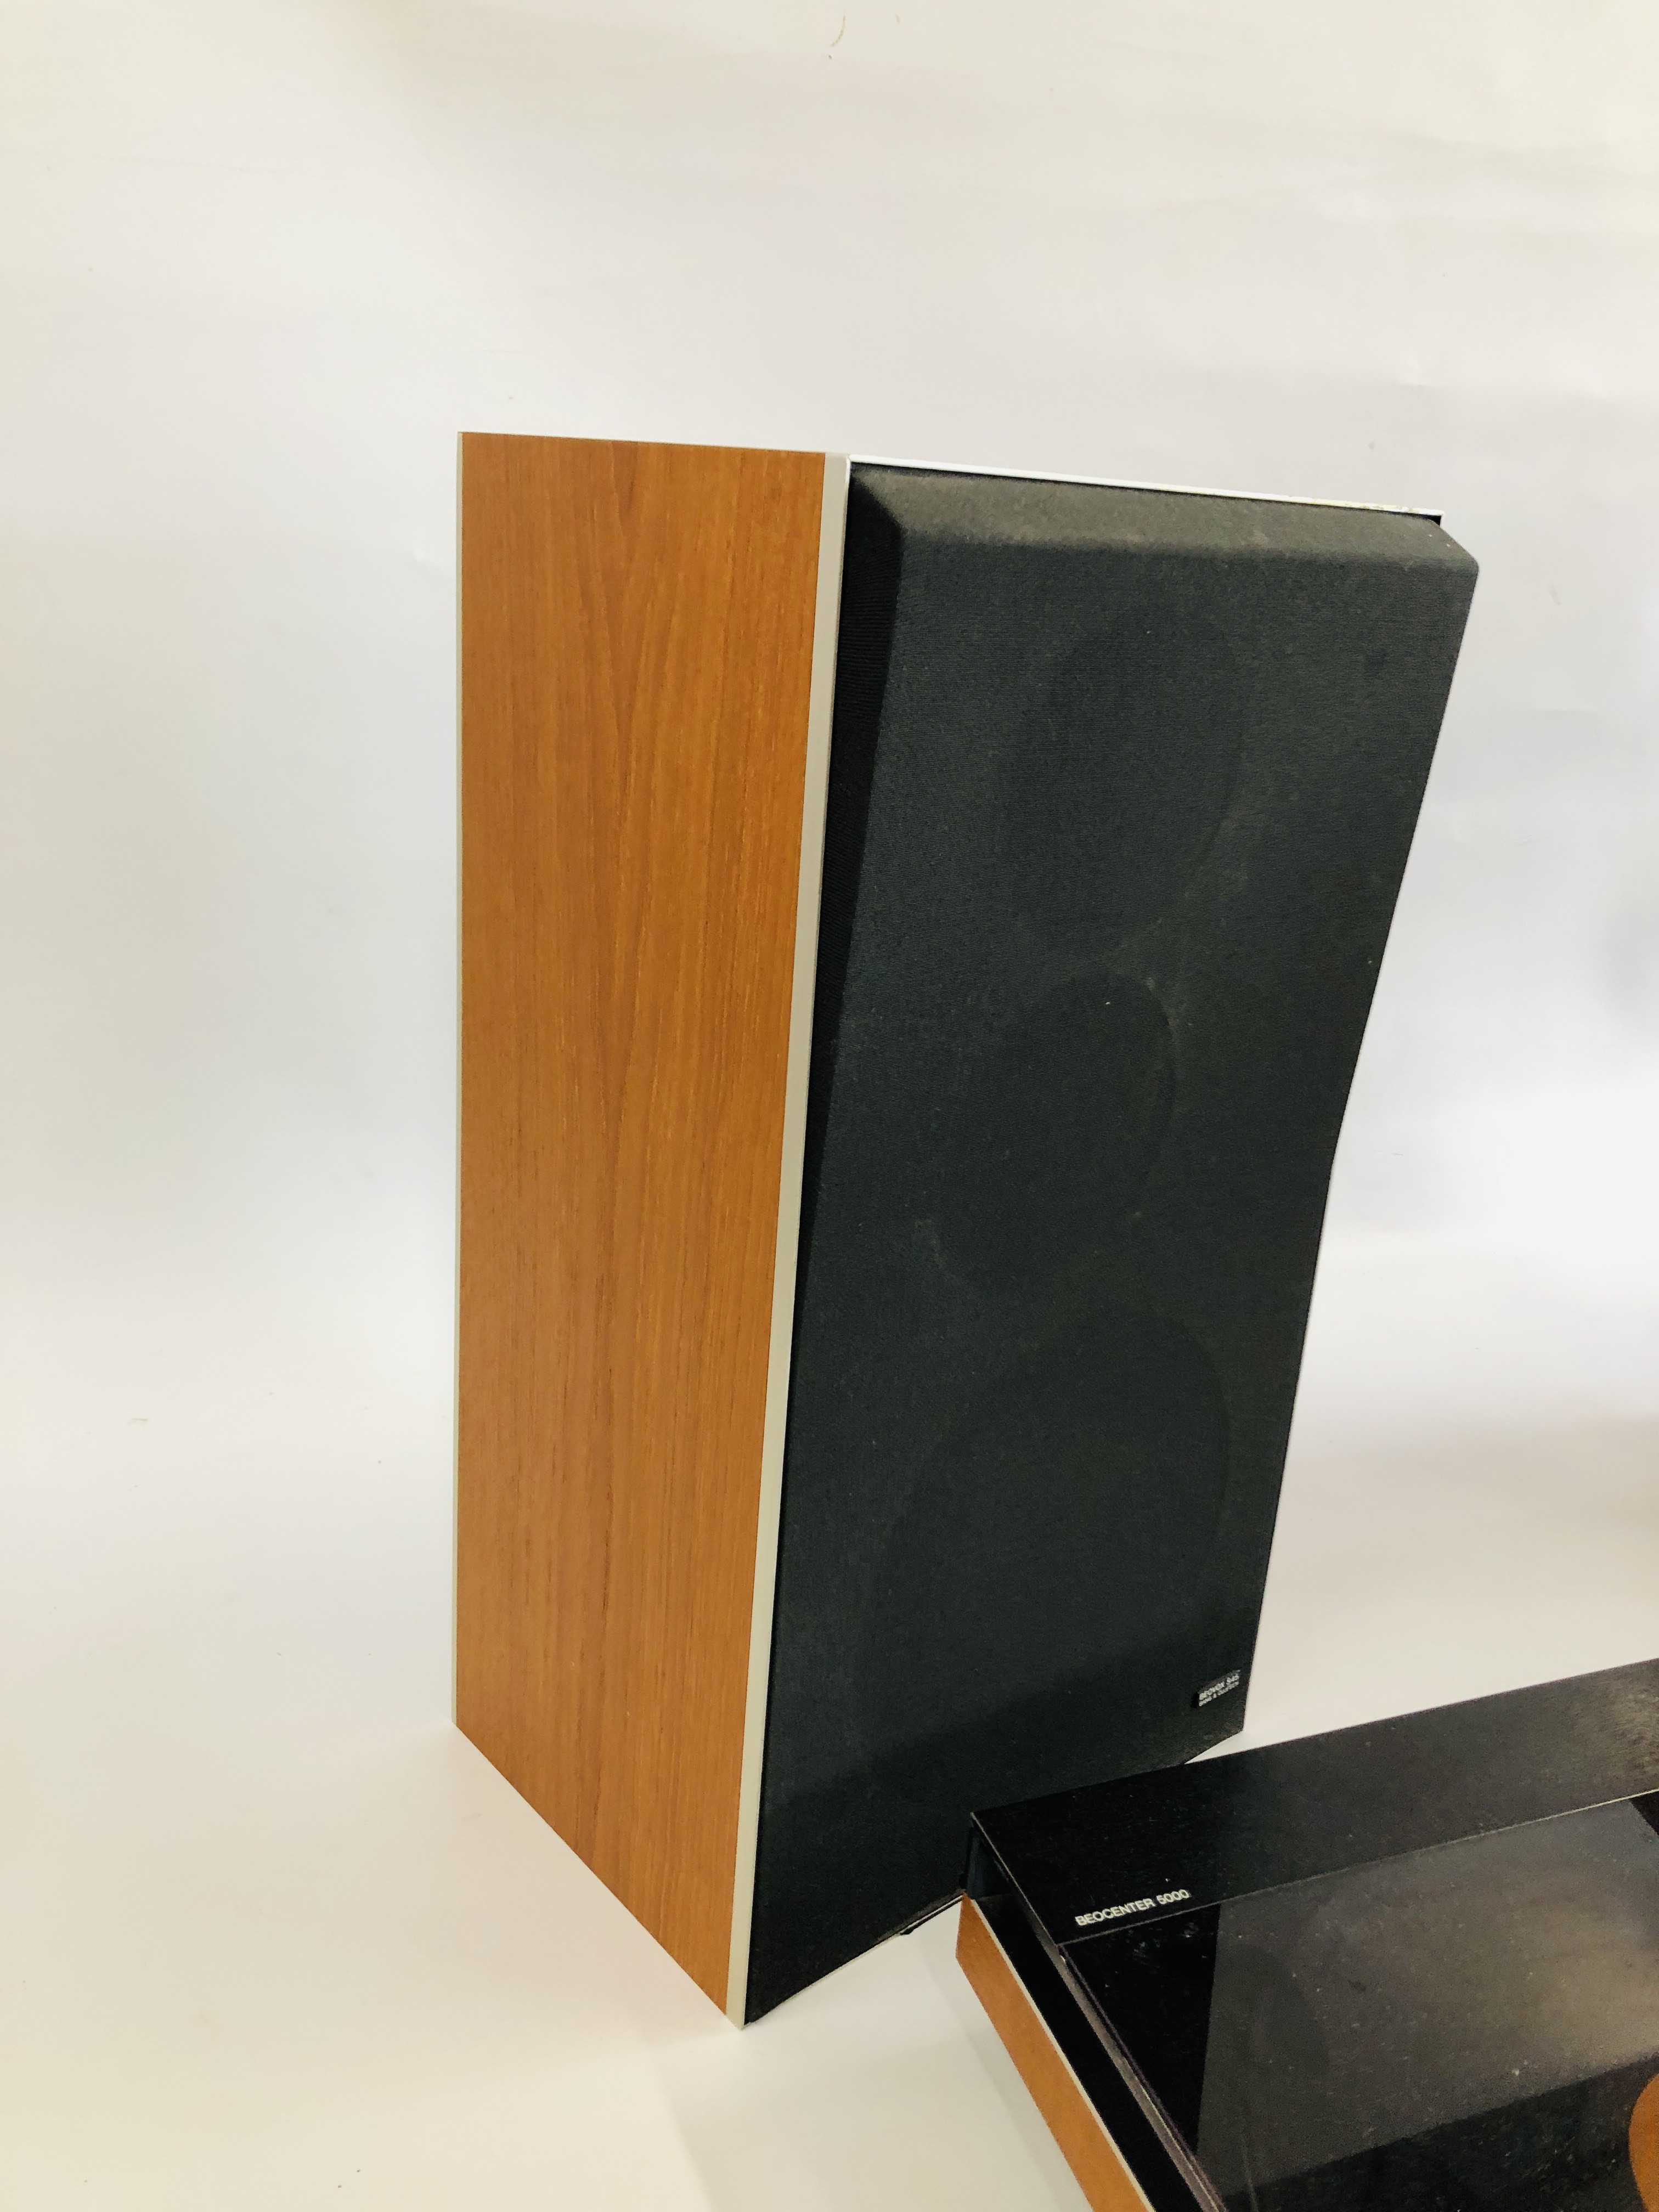 A BANG & OLUFSEN BEOCENTRE 5000 COMPLETE WITH A PAIR OF BEOVAX 545 SPEAKERS - SOLD AS SEEN. - Image 10 of 11